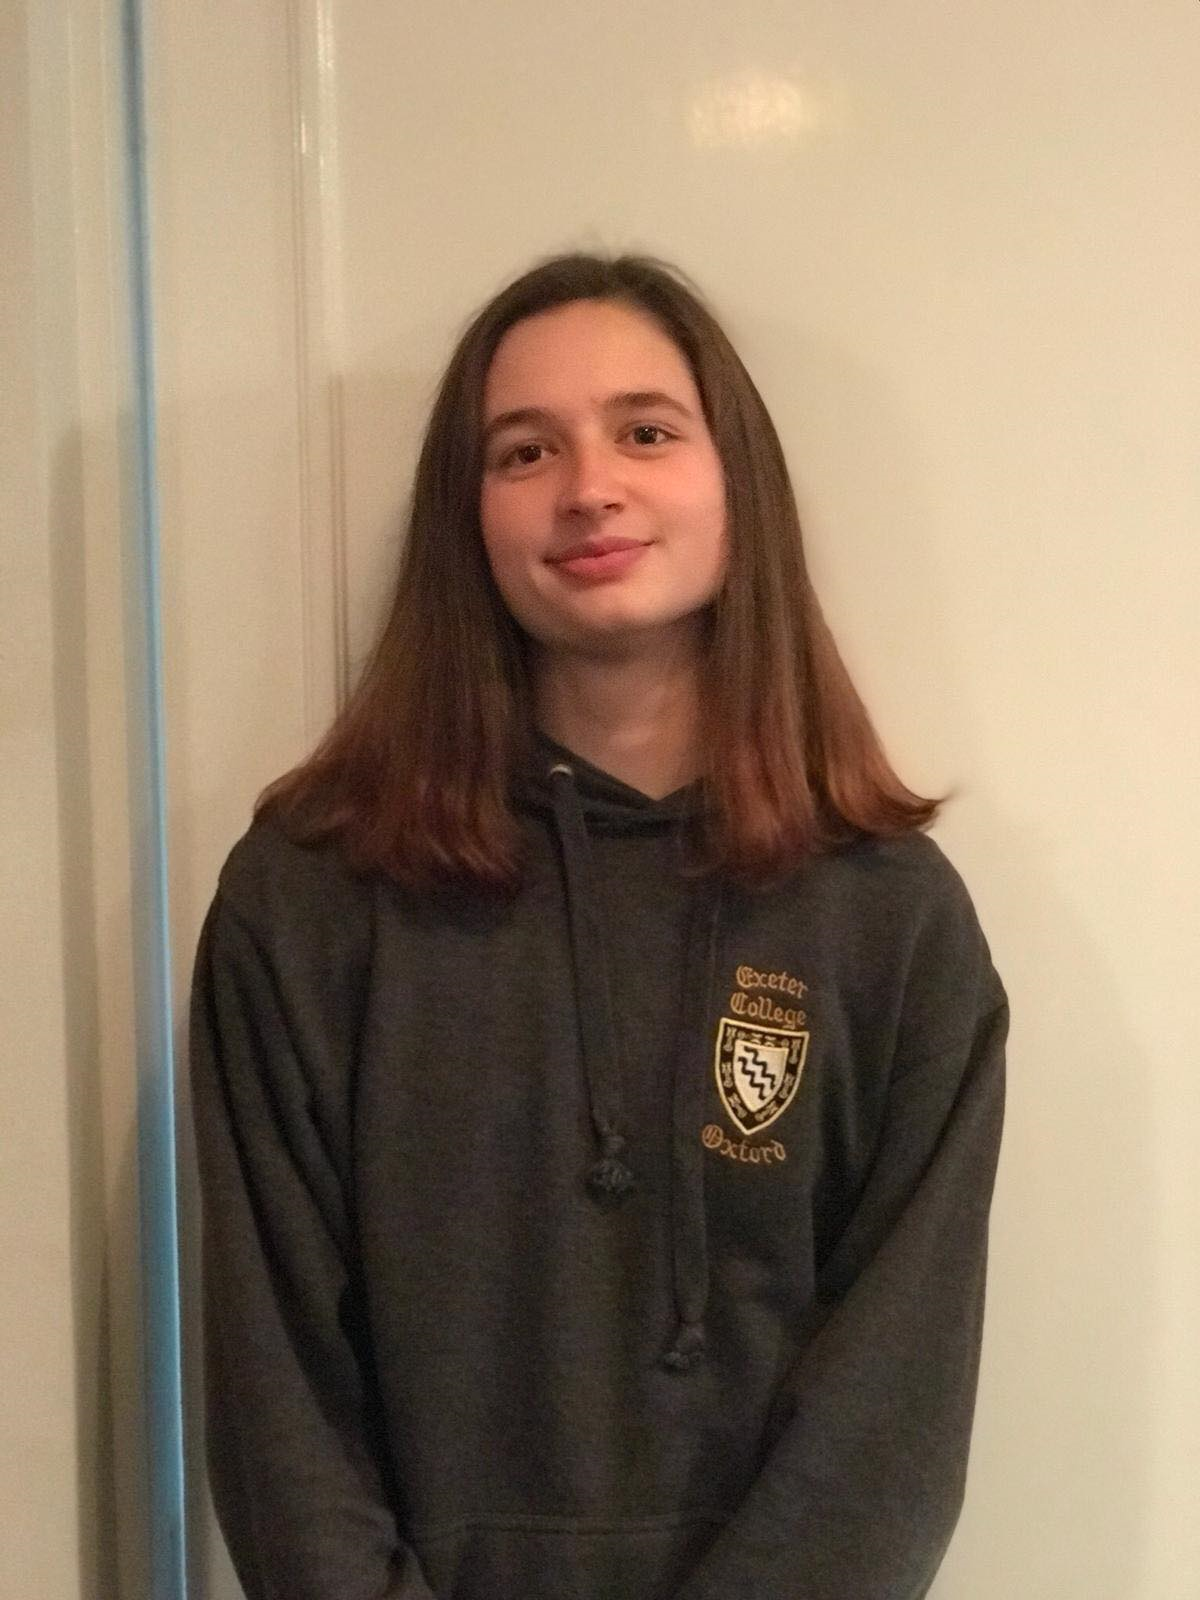 Bethany, smiling and wearing an Exeter College hoodie